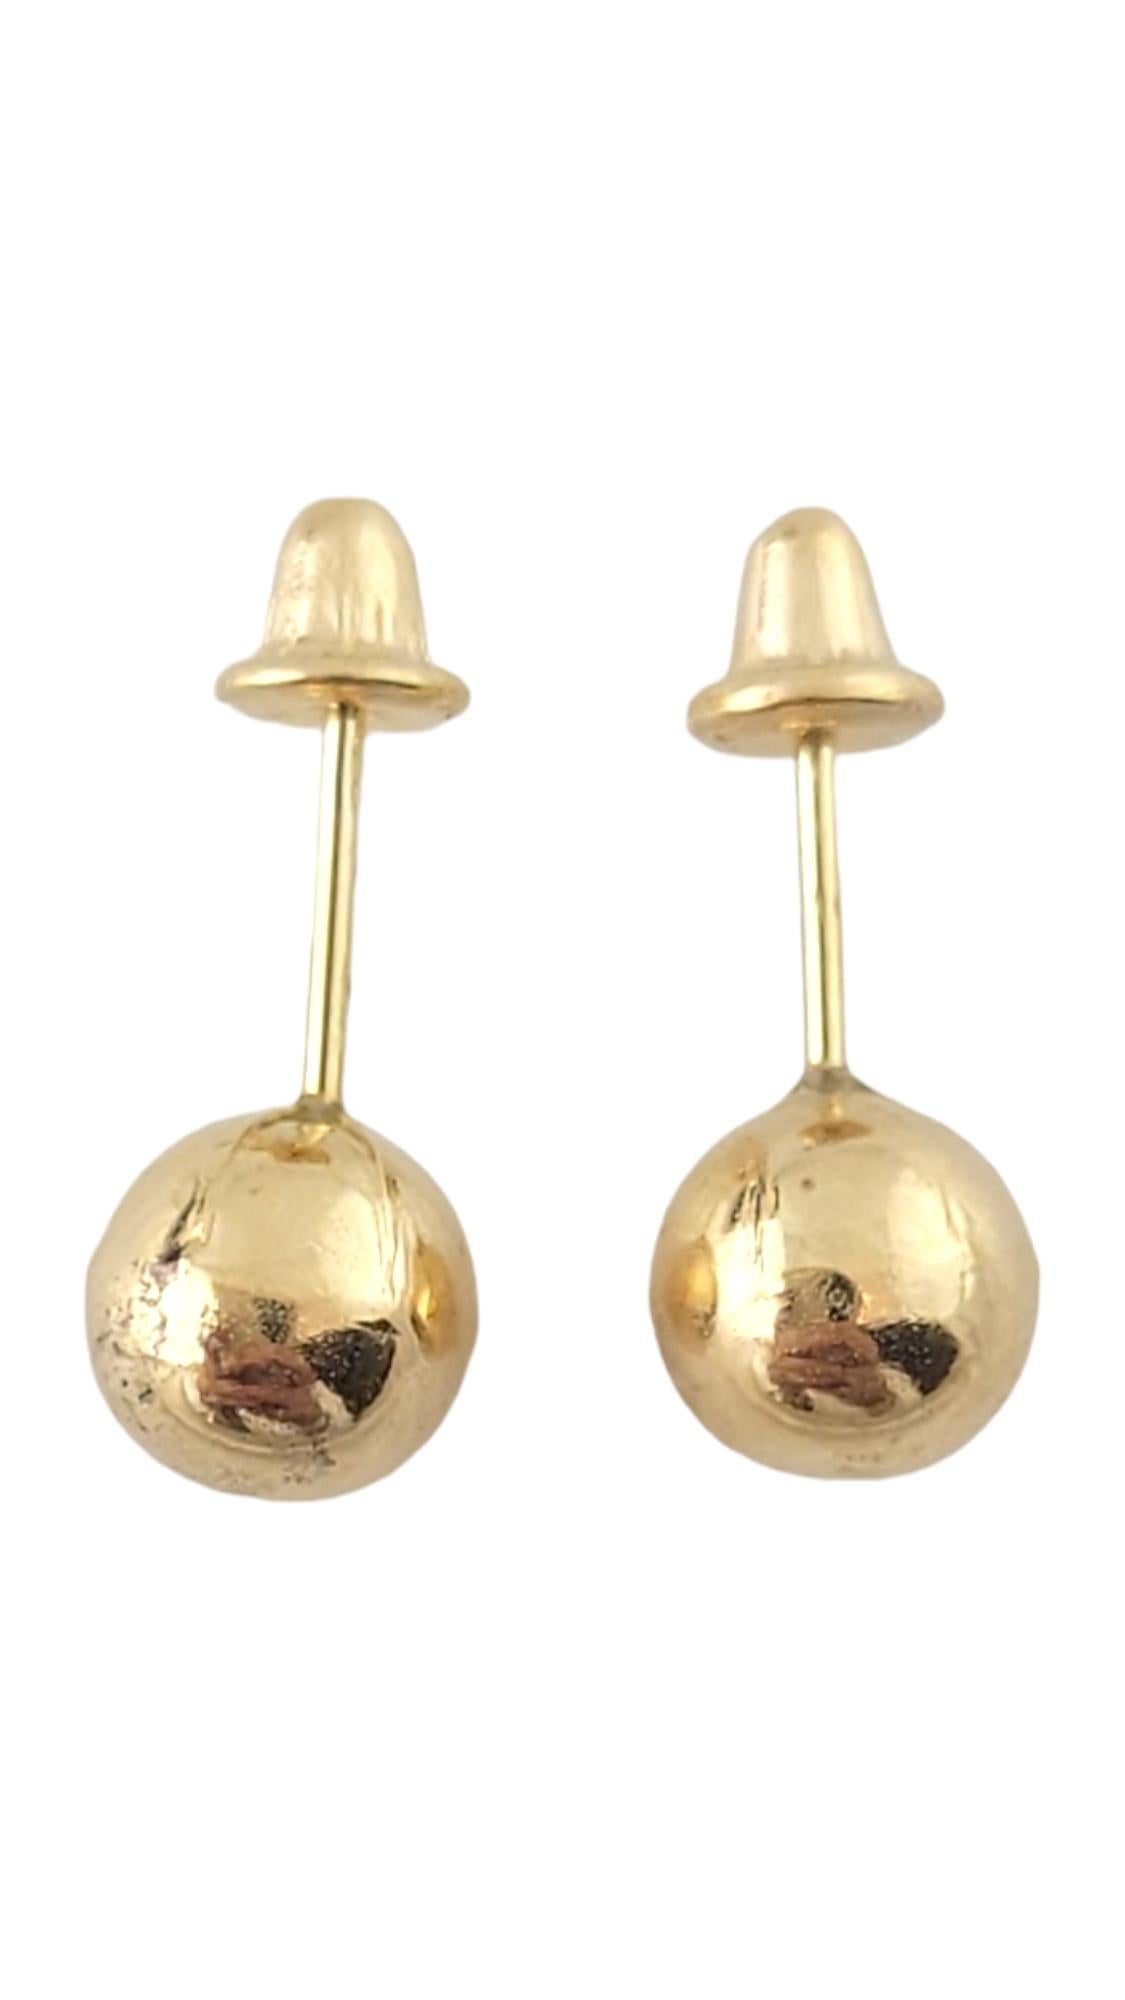 10K Yellow Gold Ball Stud Earrings #16382 In Good Condition For Sale In Washington Depot, CT